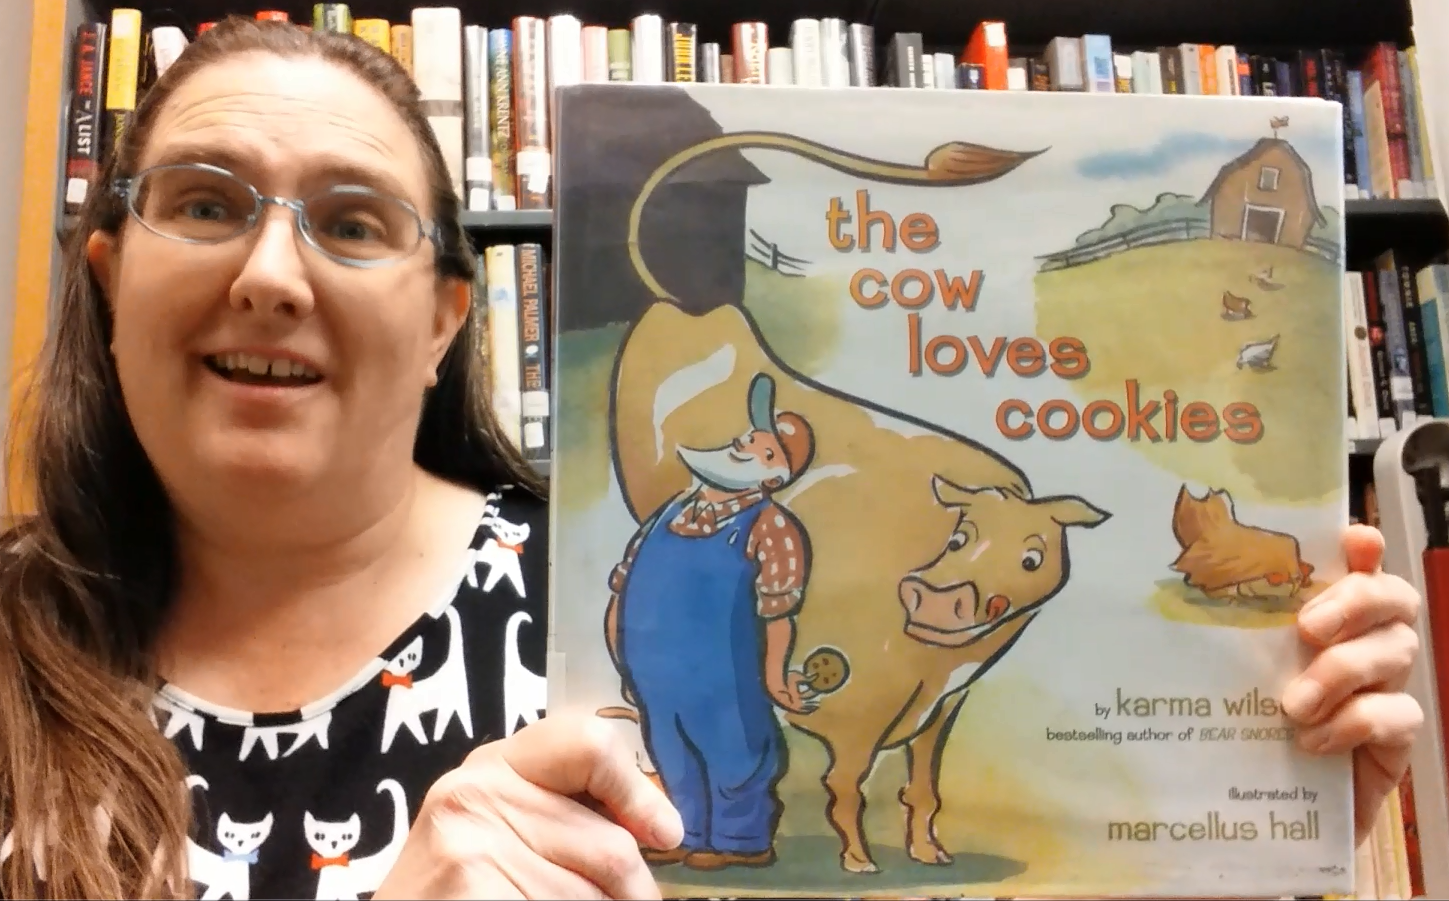 librarian holding up book "The Cow Loves Cookies"